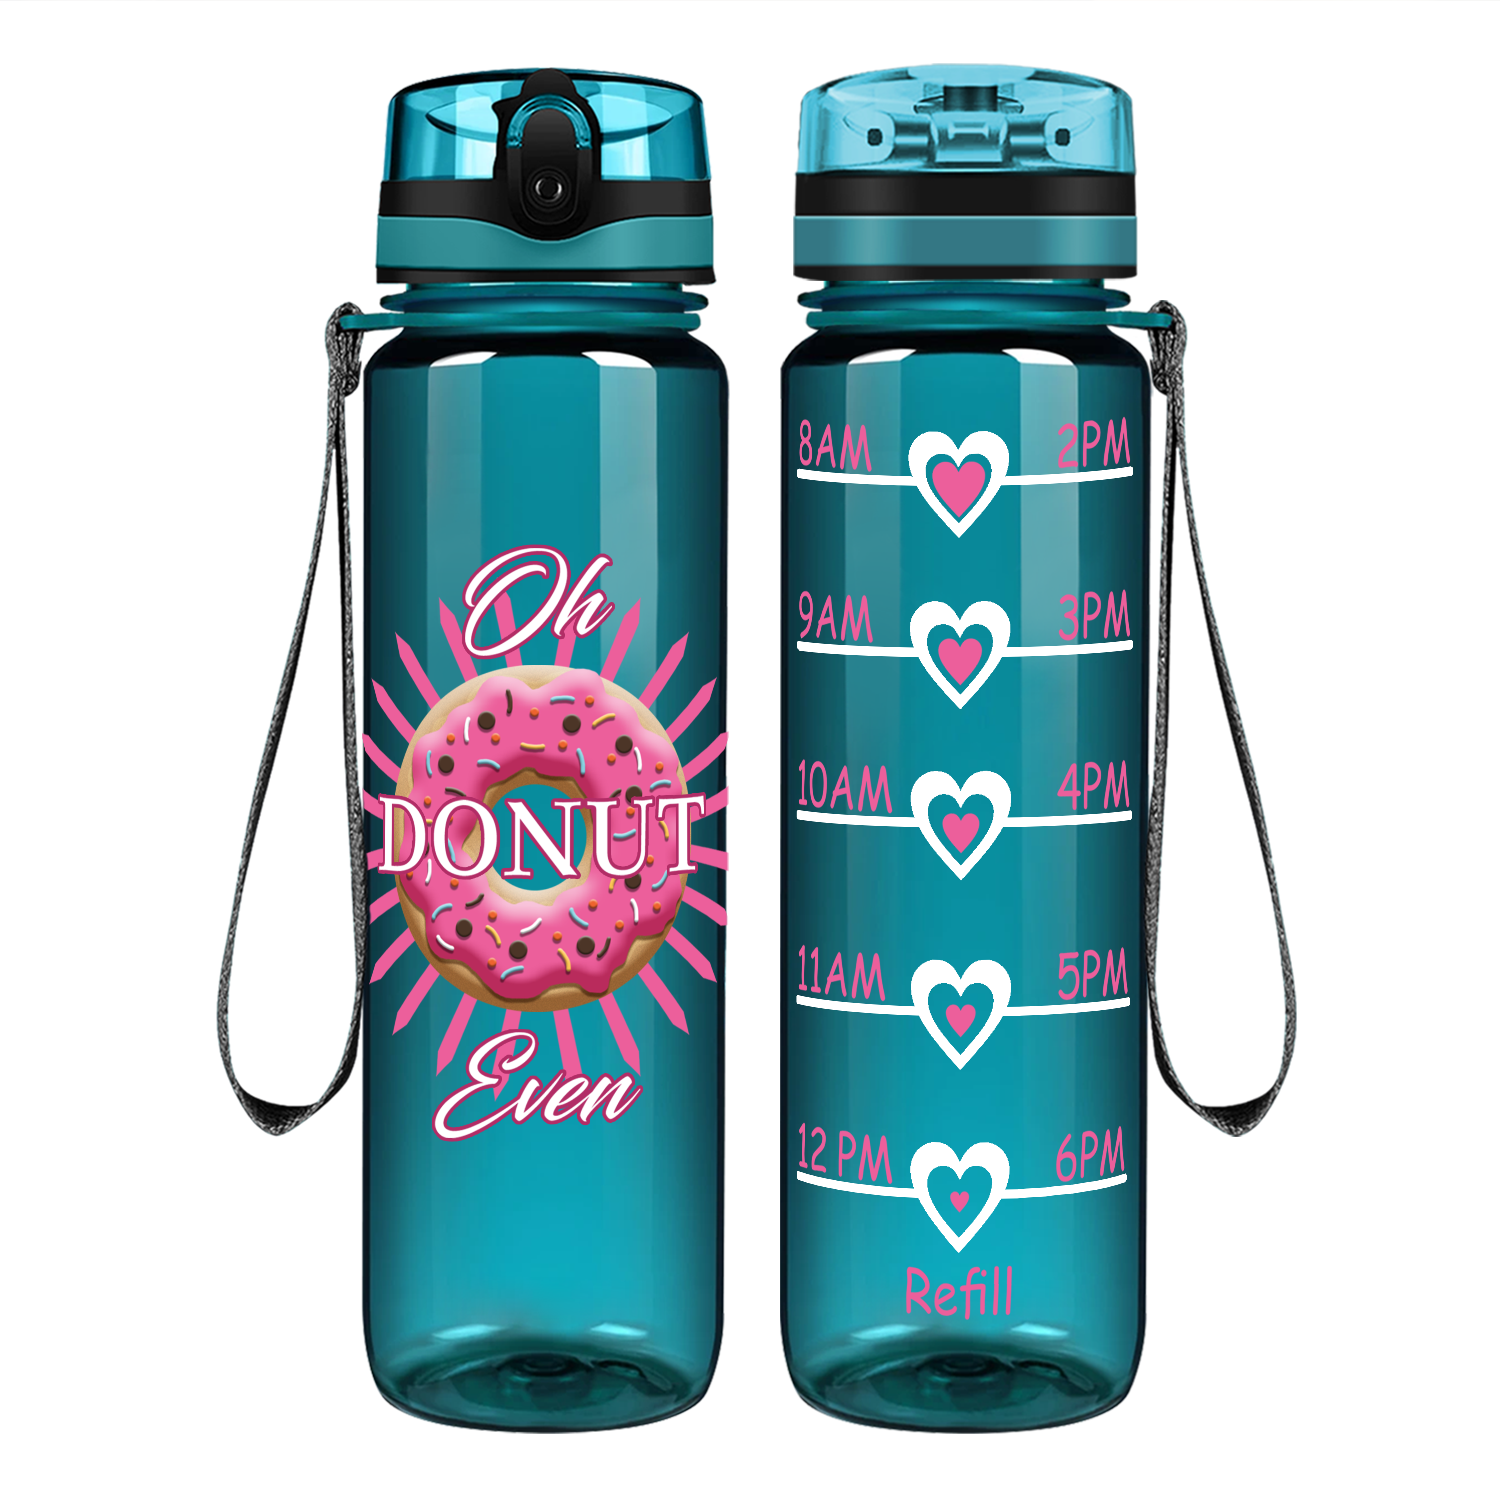 Oh Donut Even on 32 oz Motivational Tracking Water Bottle